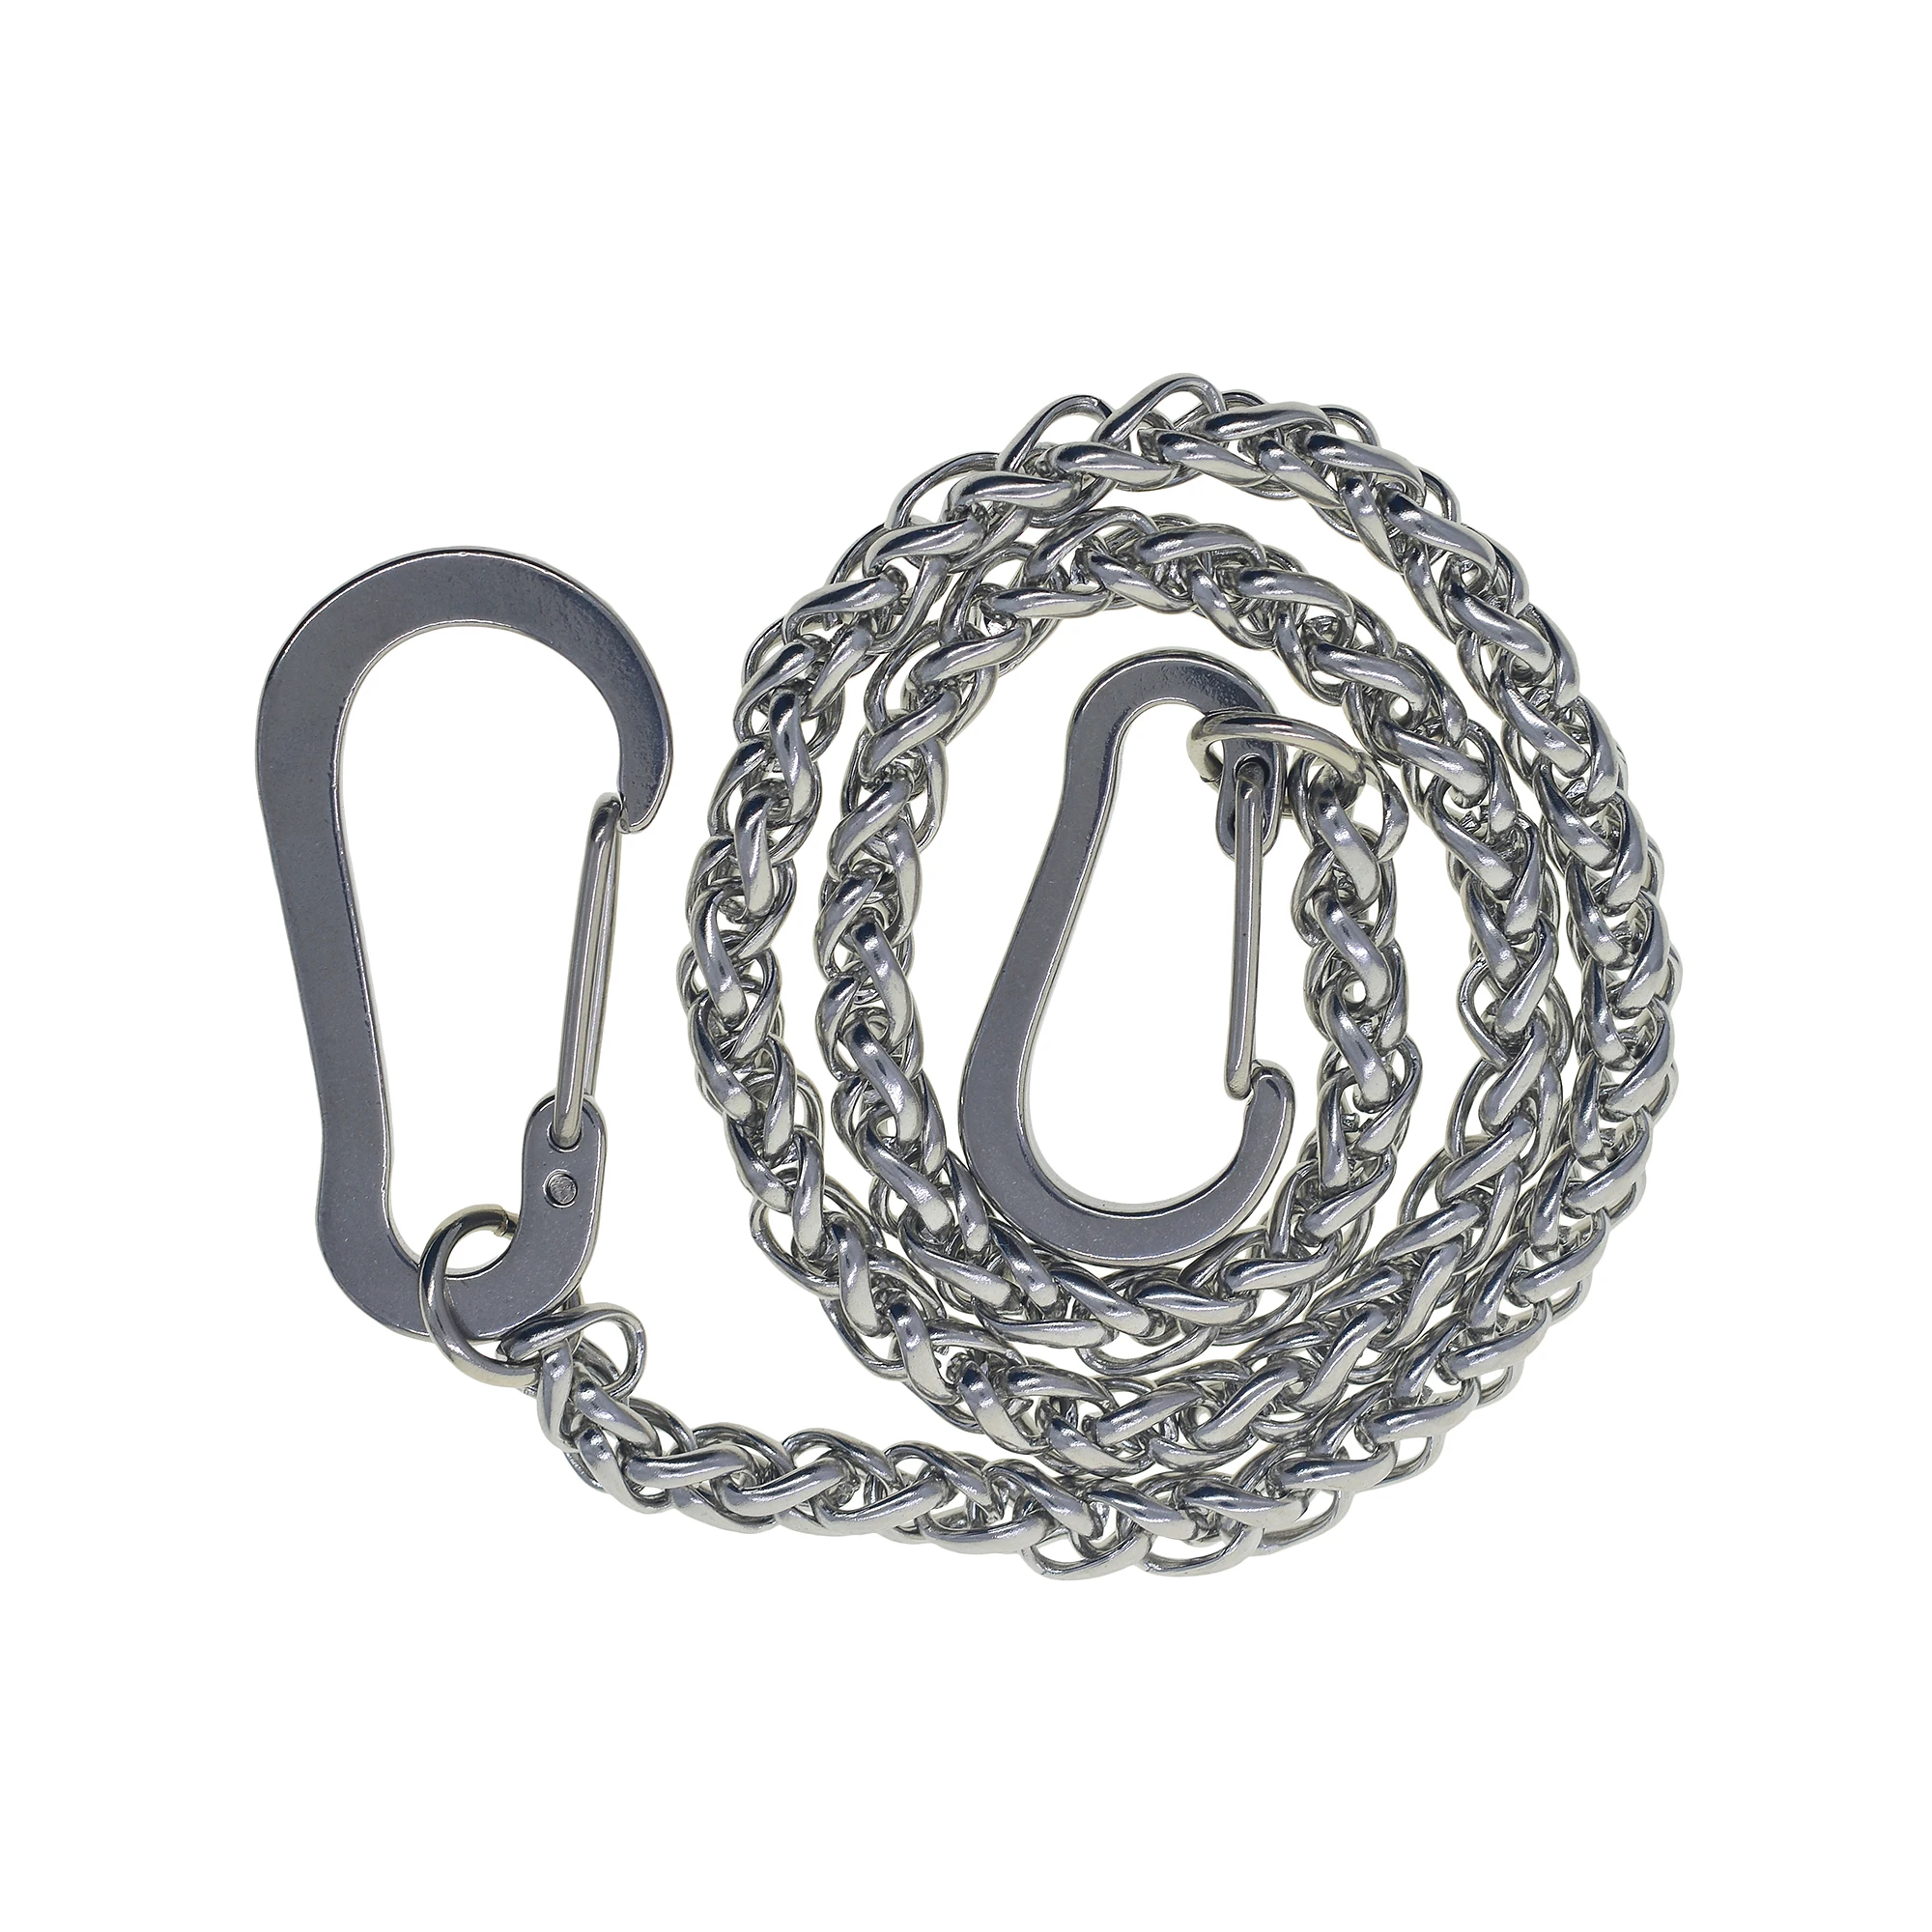 

Punk Stainless steel snake wheat wallet trousers biker keychains gift D shackle super strong easy release carabiner connector